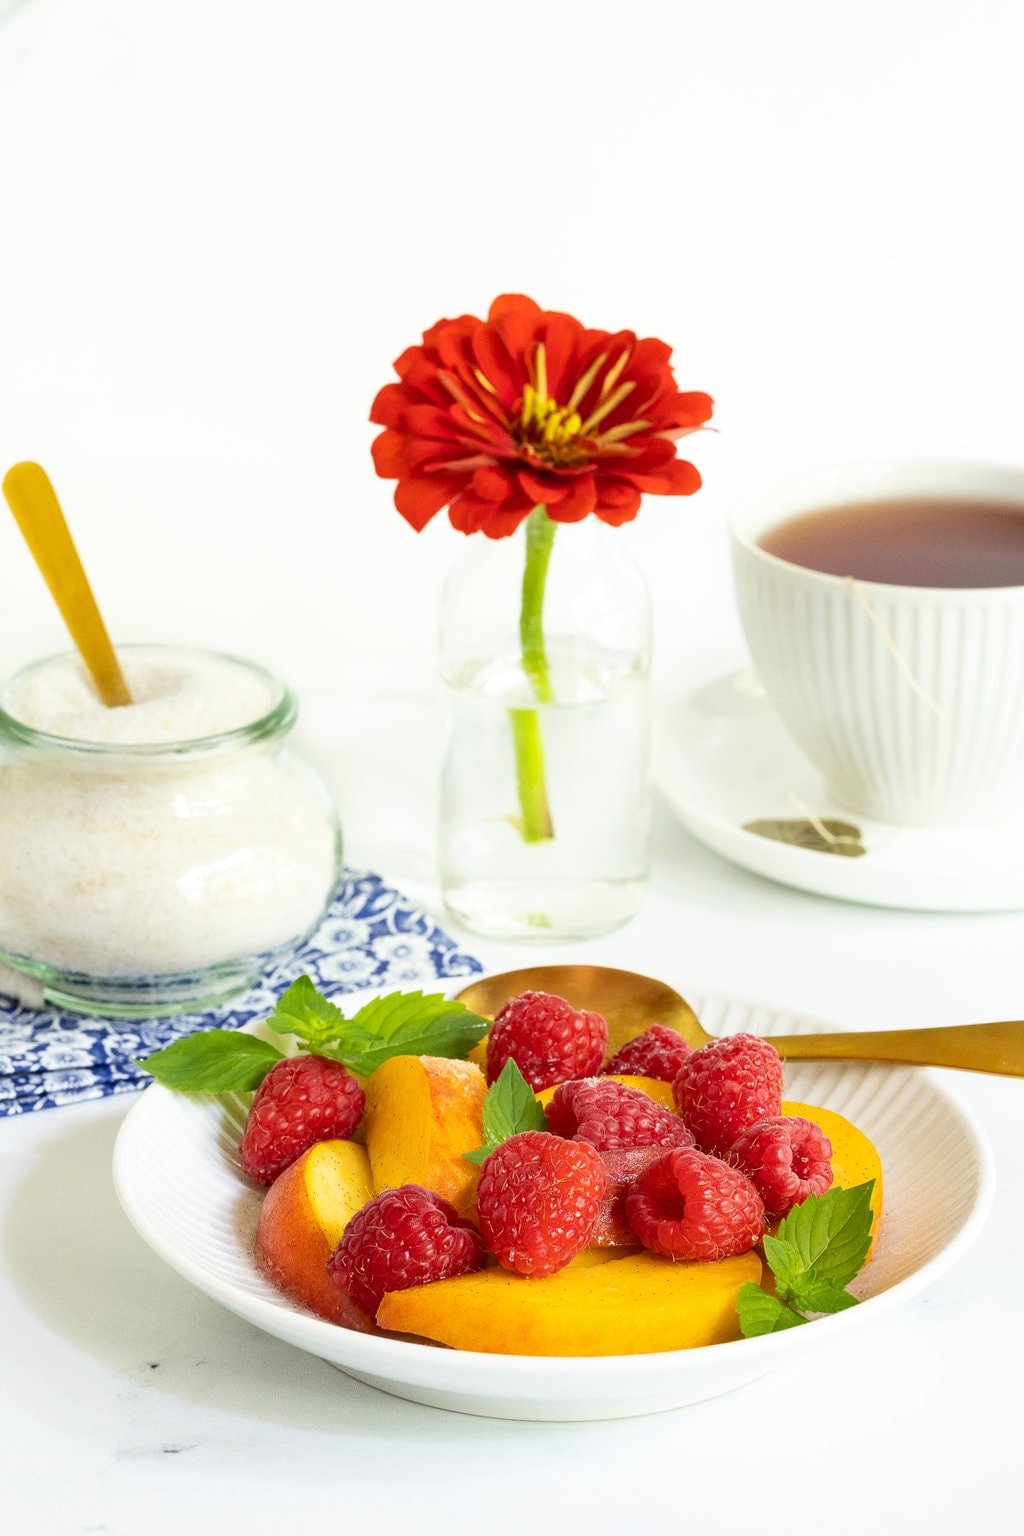 Vertical photo of a bowl of fresh fruit sprinkled with French Vanilla Sugar (Sucre Vanillé).